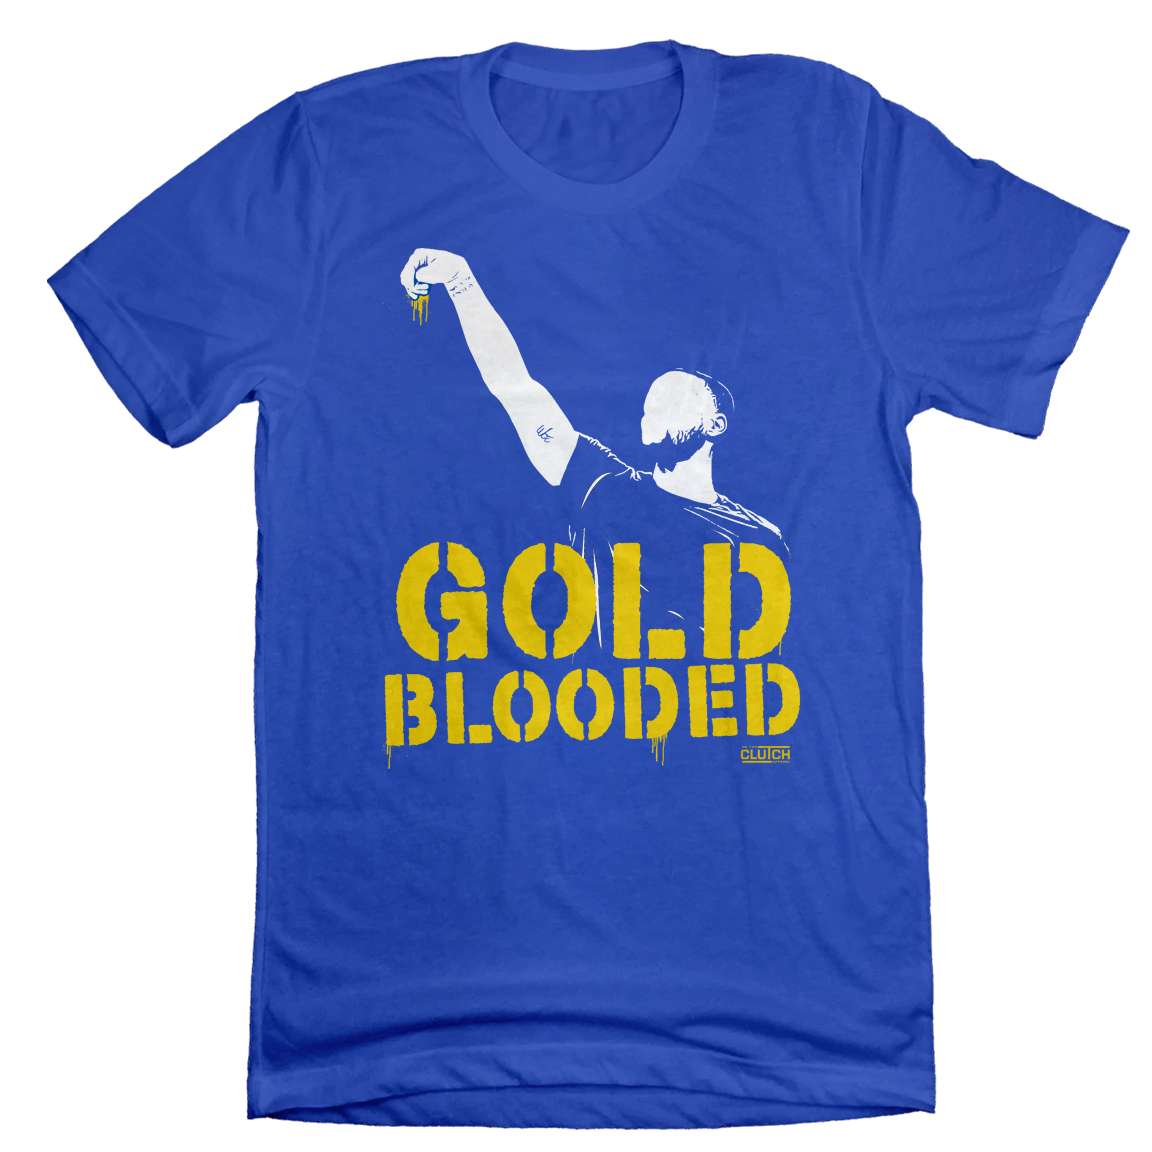 Gold Blooded tee blue